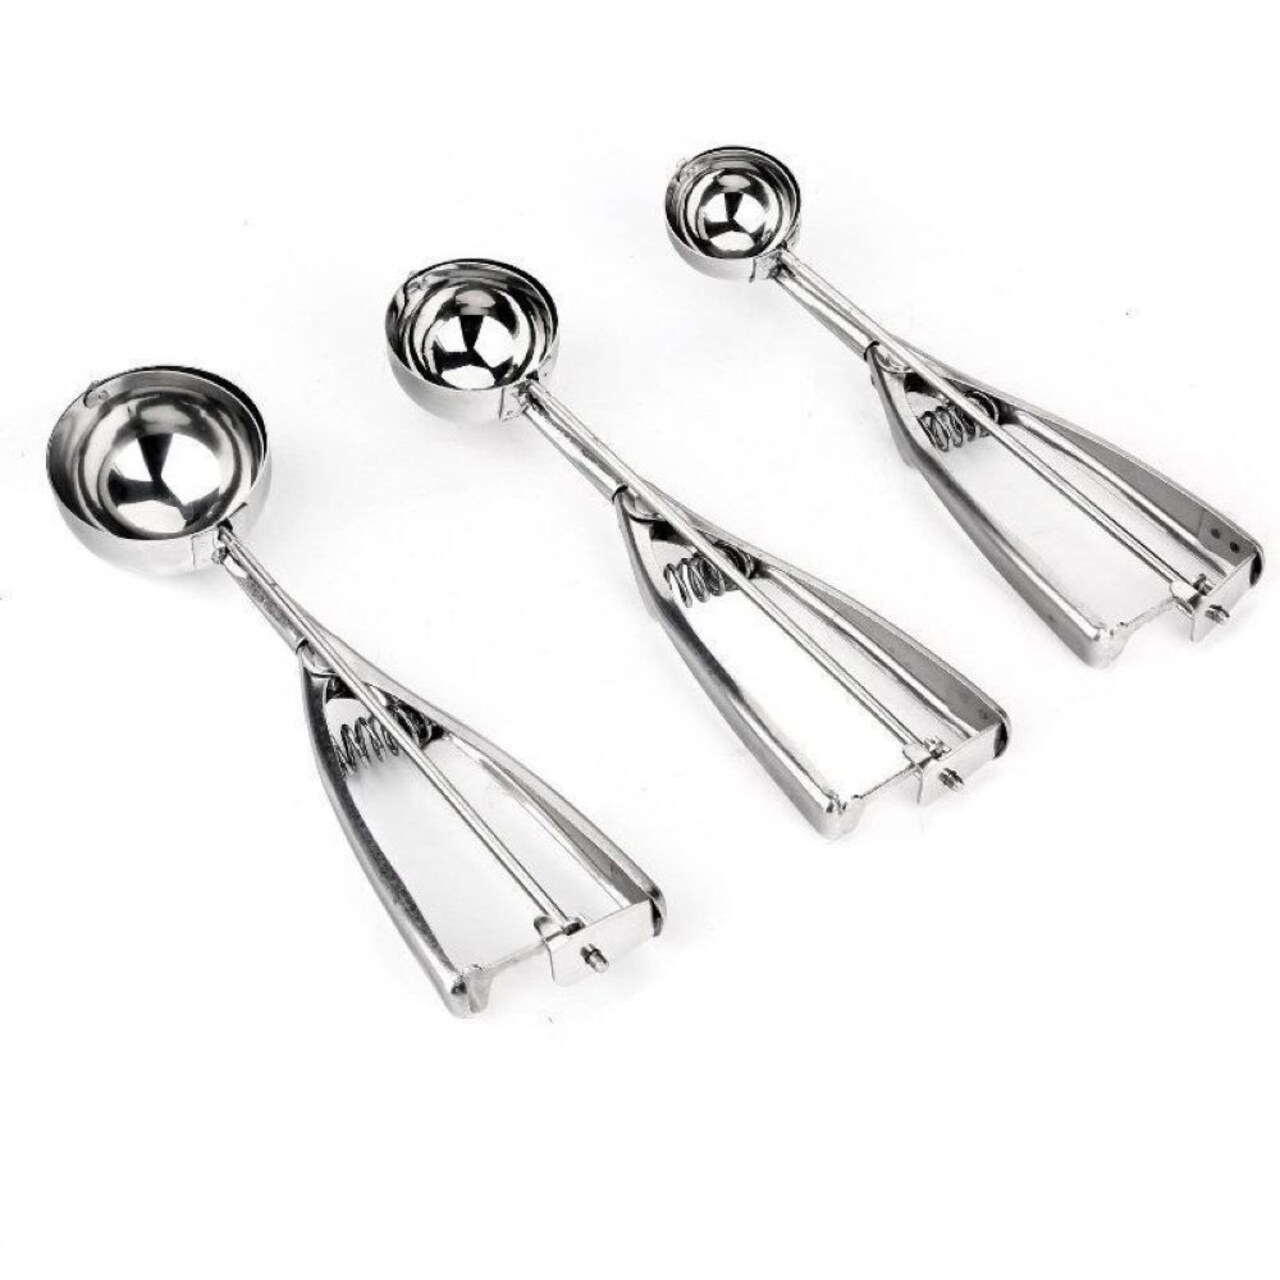 Kitcheniva Stainless Steel Ice Cream Scoops With Trigger Handle Set of 3